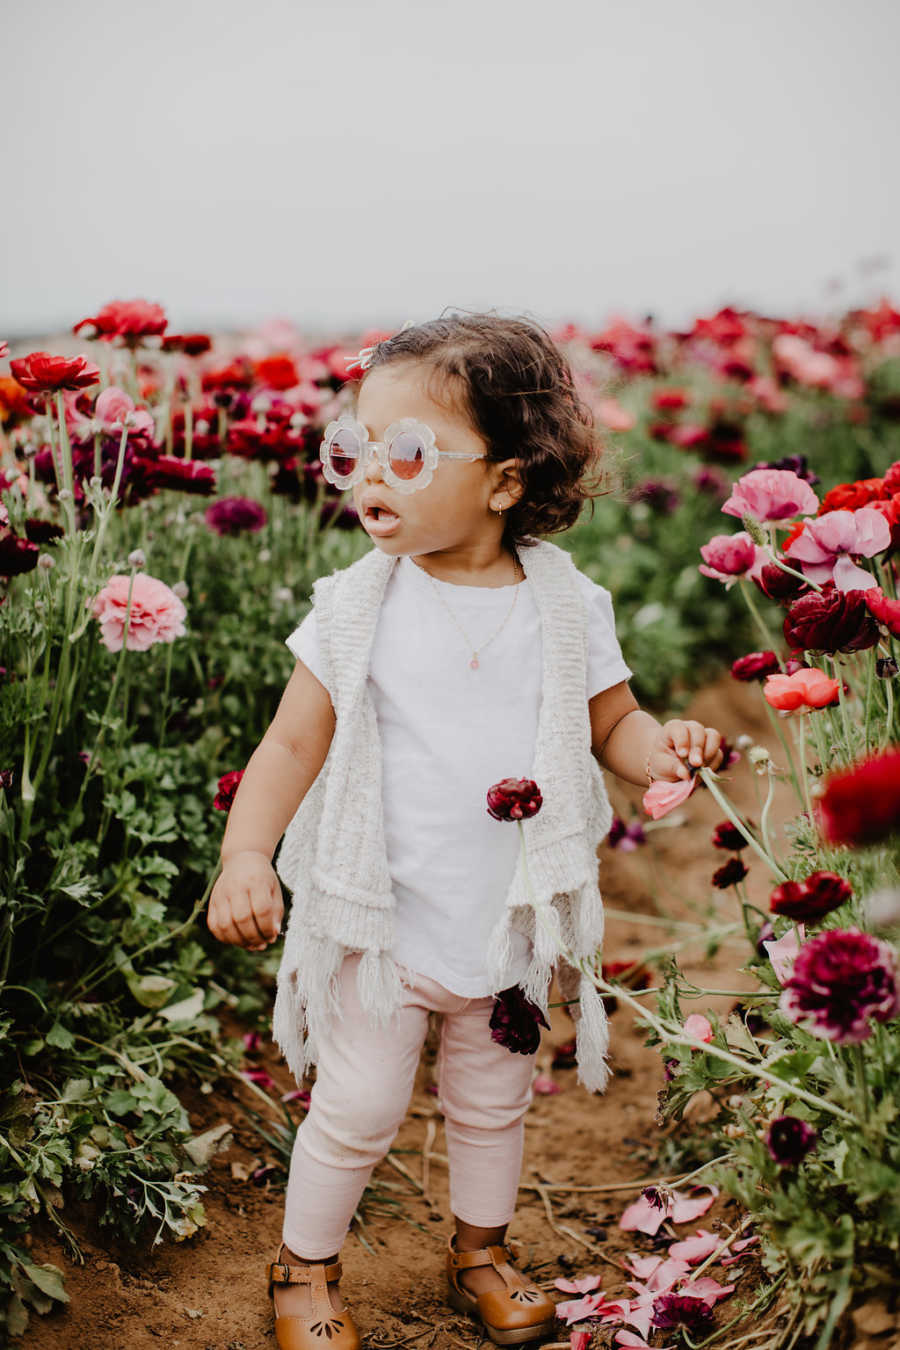 Little girl wearing sunglasses stands in field of pink and red flowers